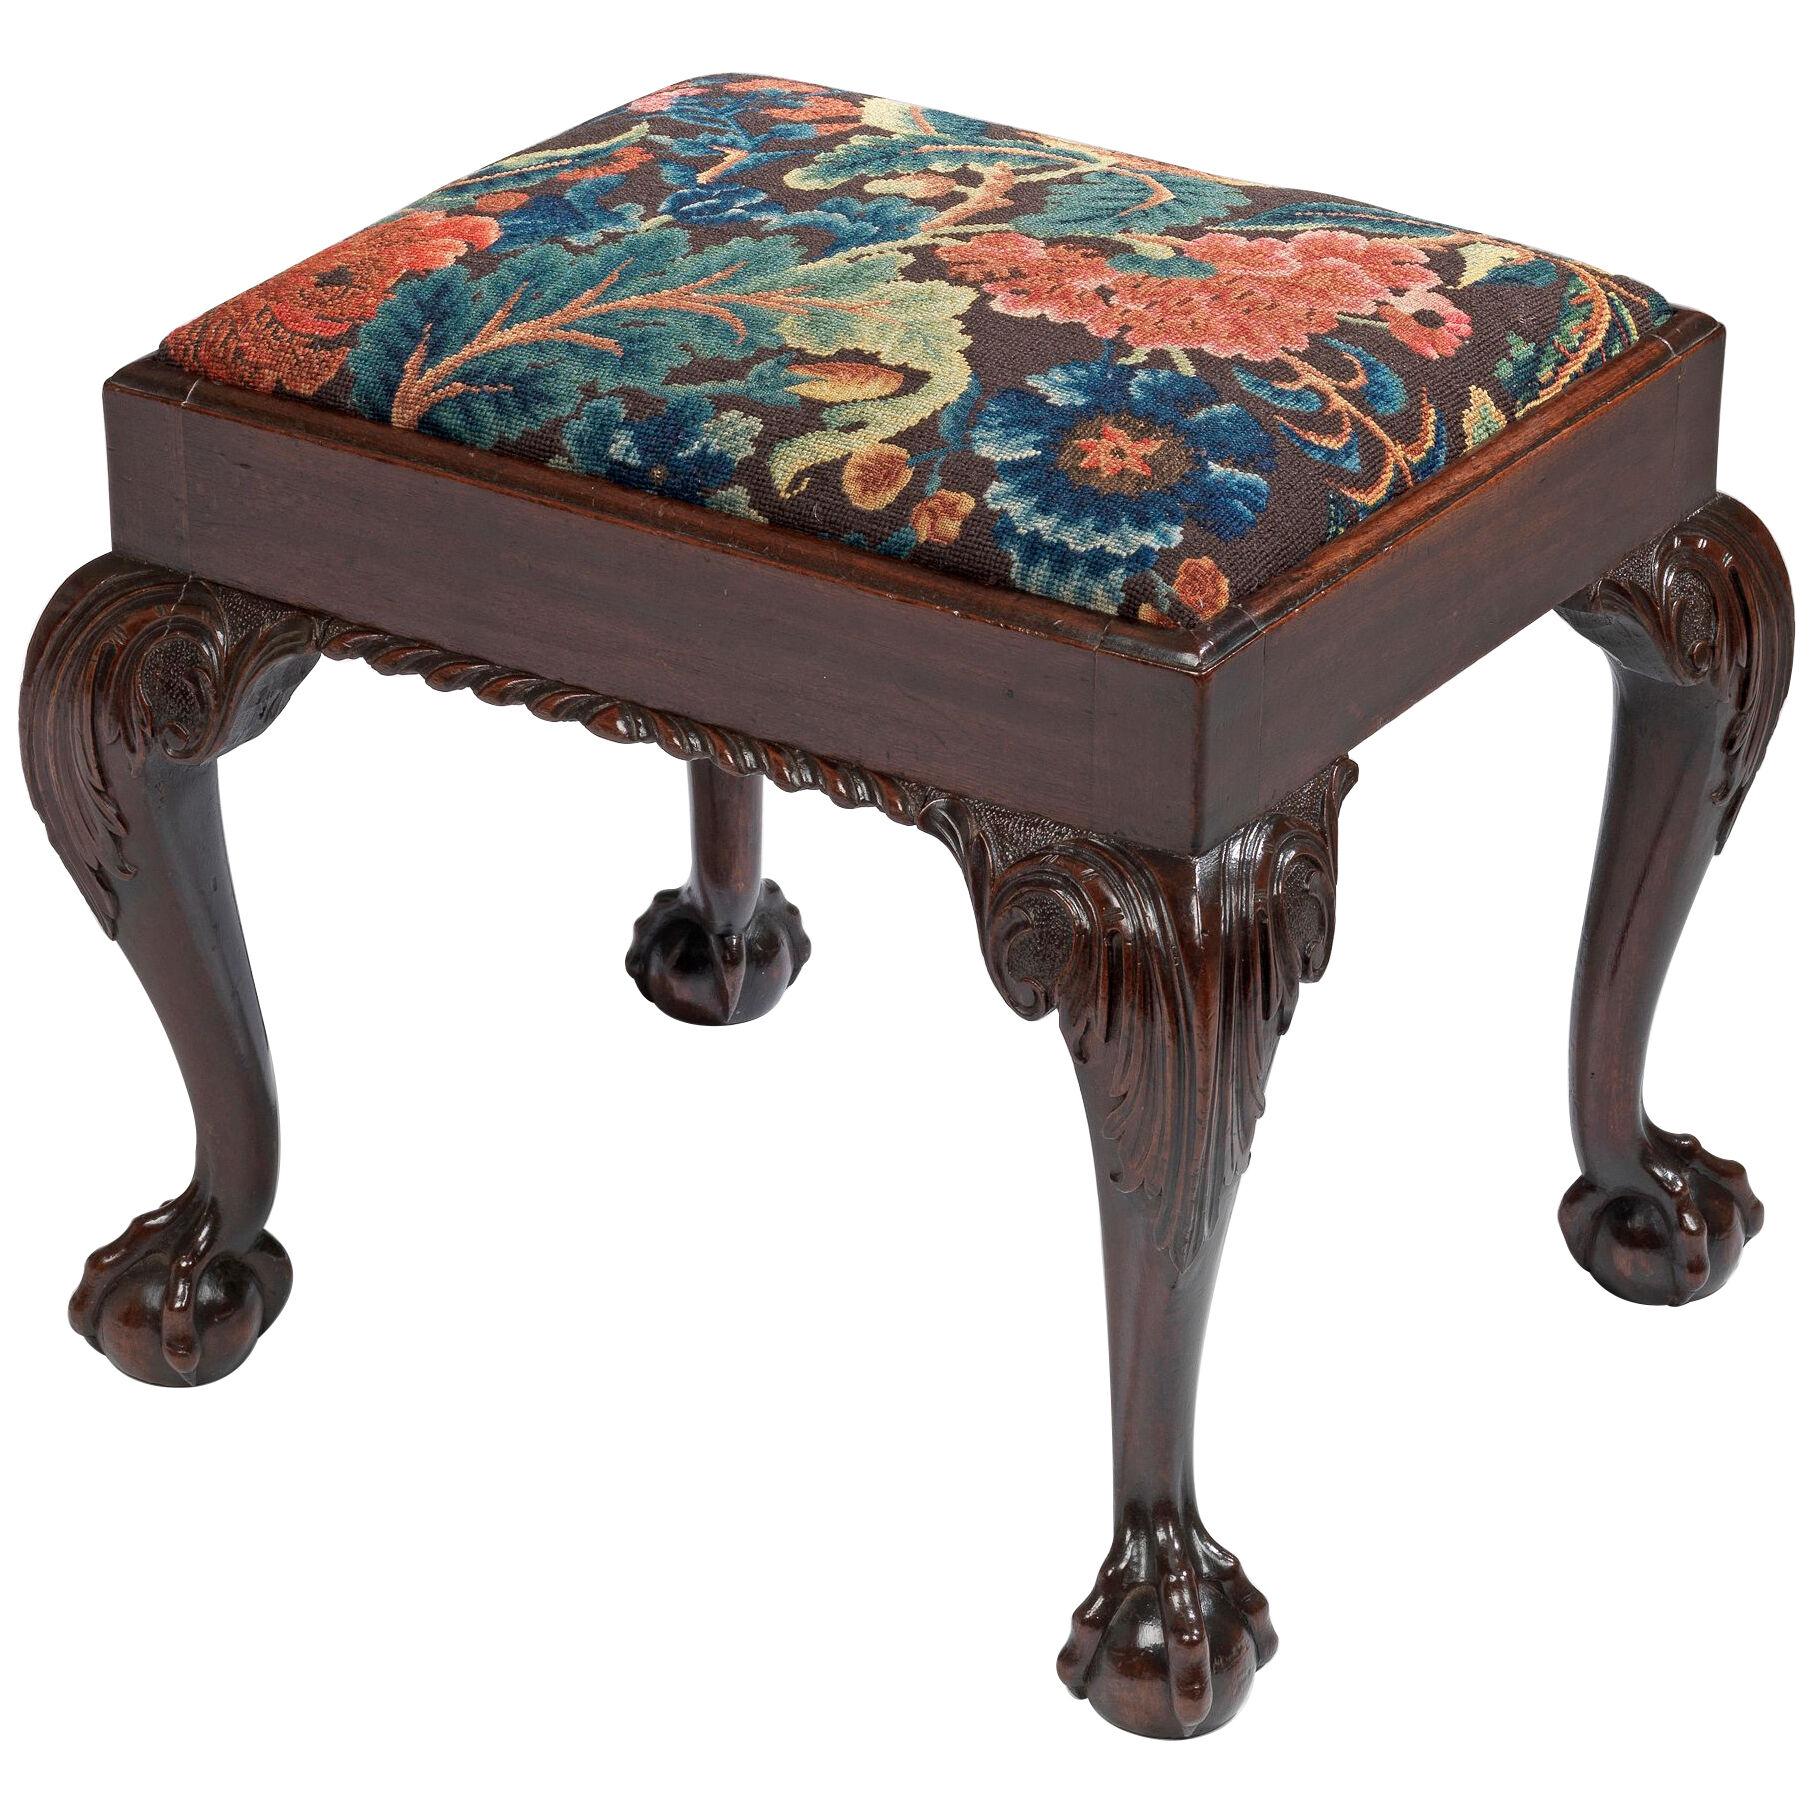 A George II Mahogany Stool upholstered with associated 18th Needlework